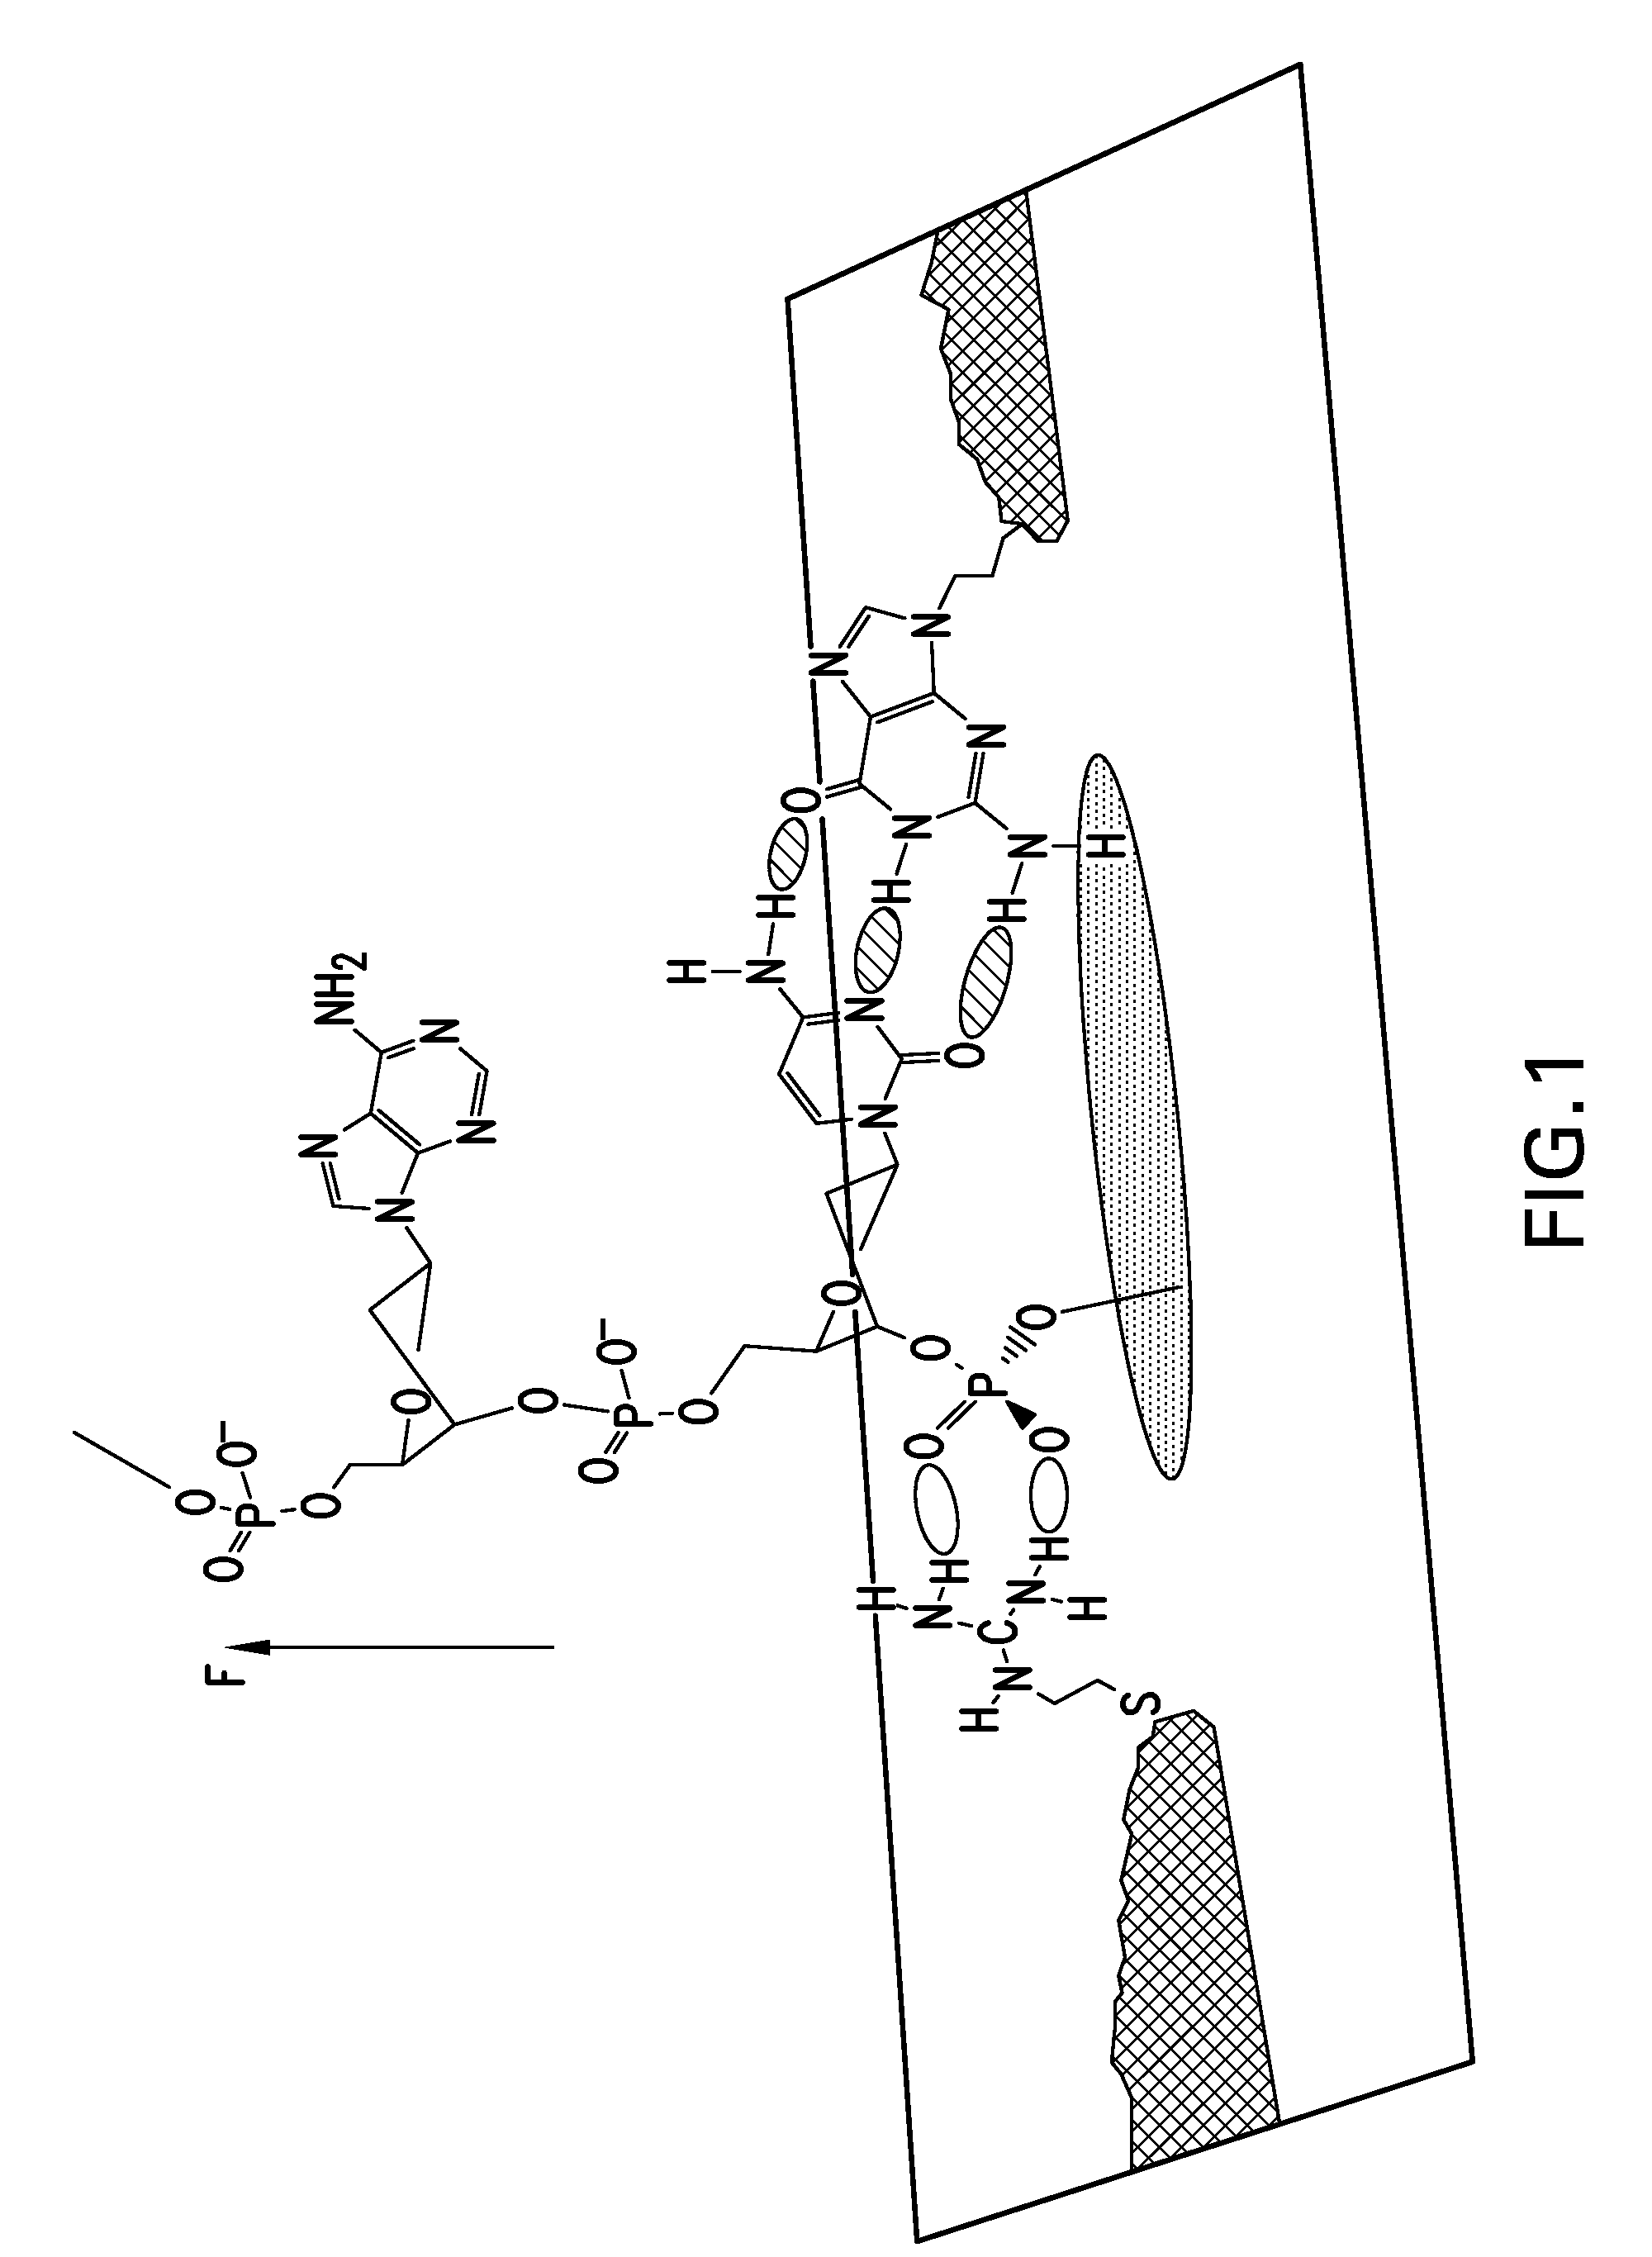 Devices and Methods for Target Molecule Characterization